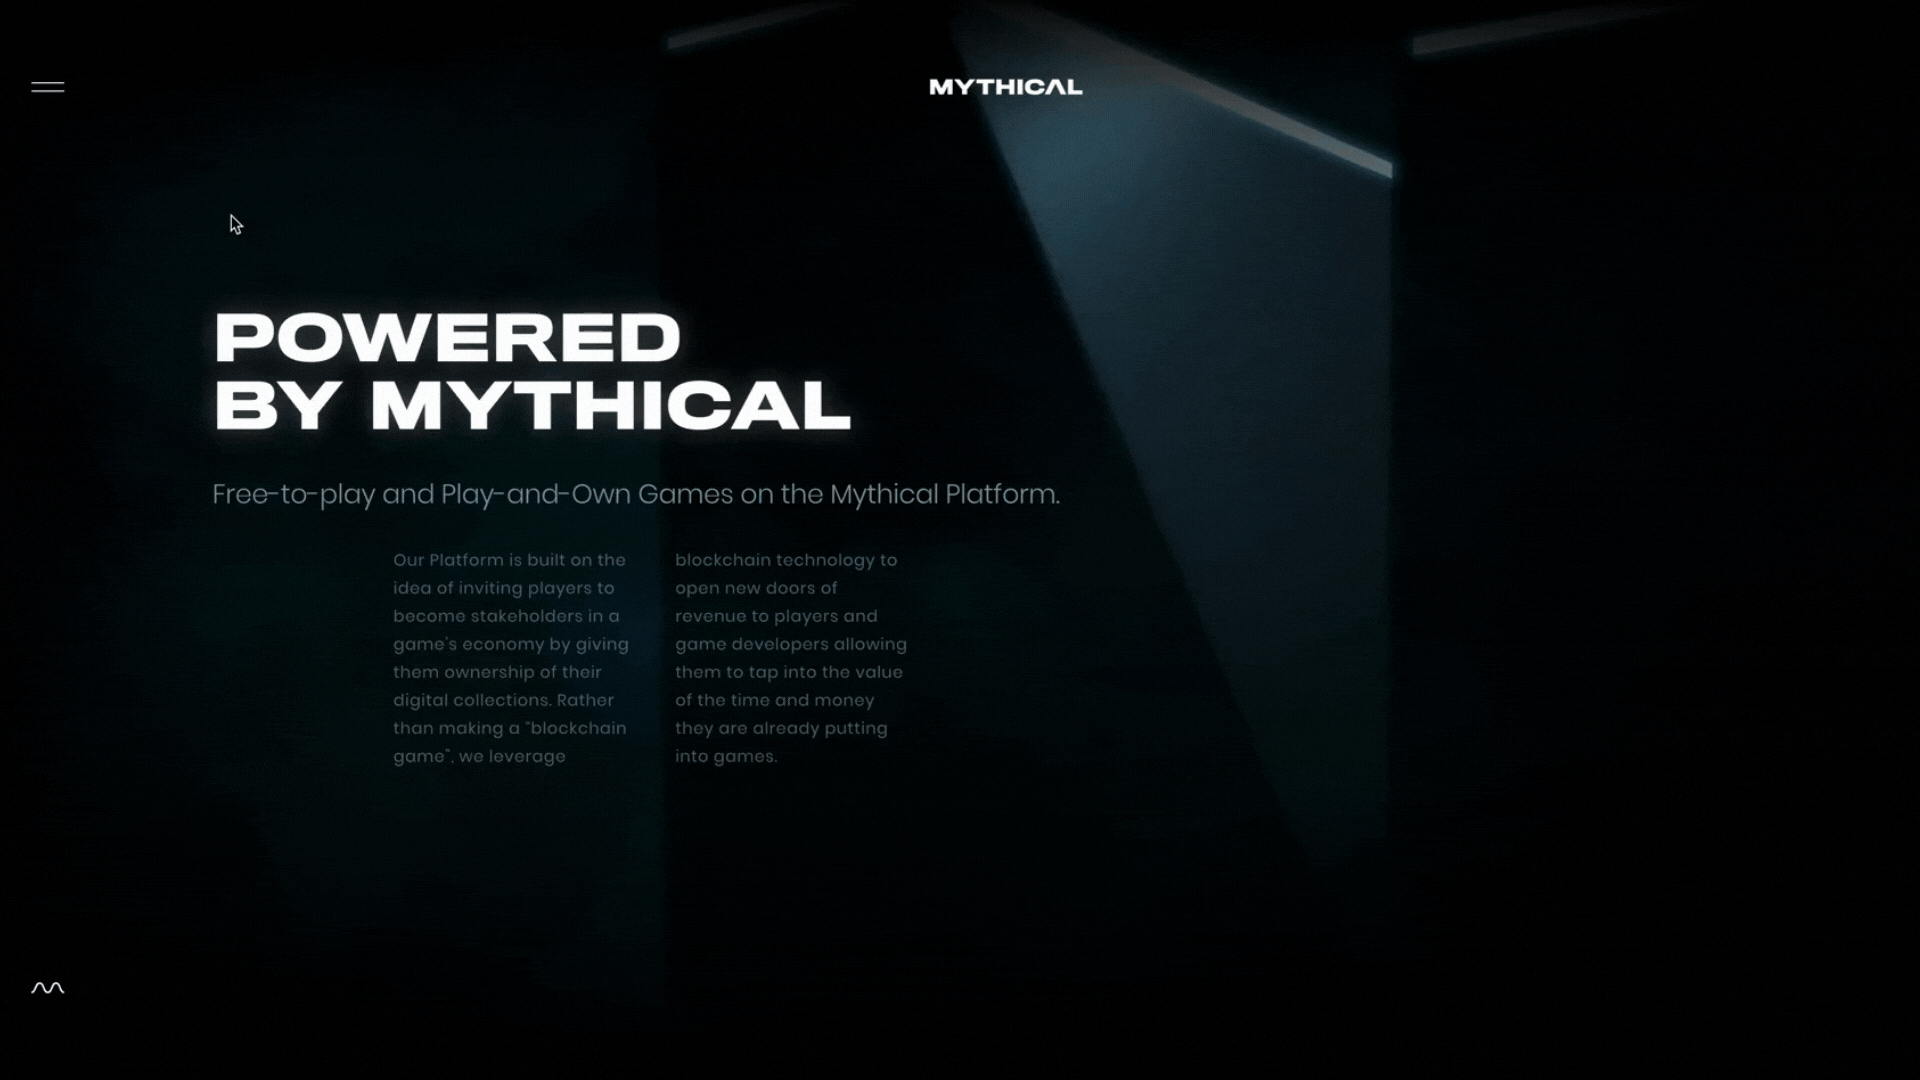 Mythical Games' technology website design draws the user in with three-dimensional graphics.